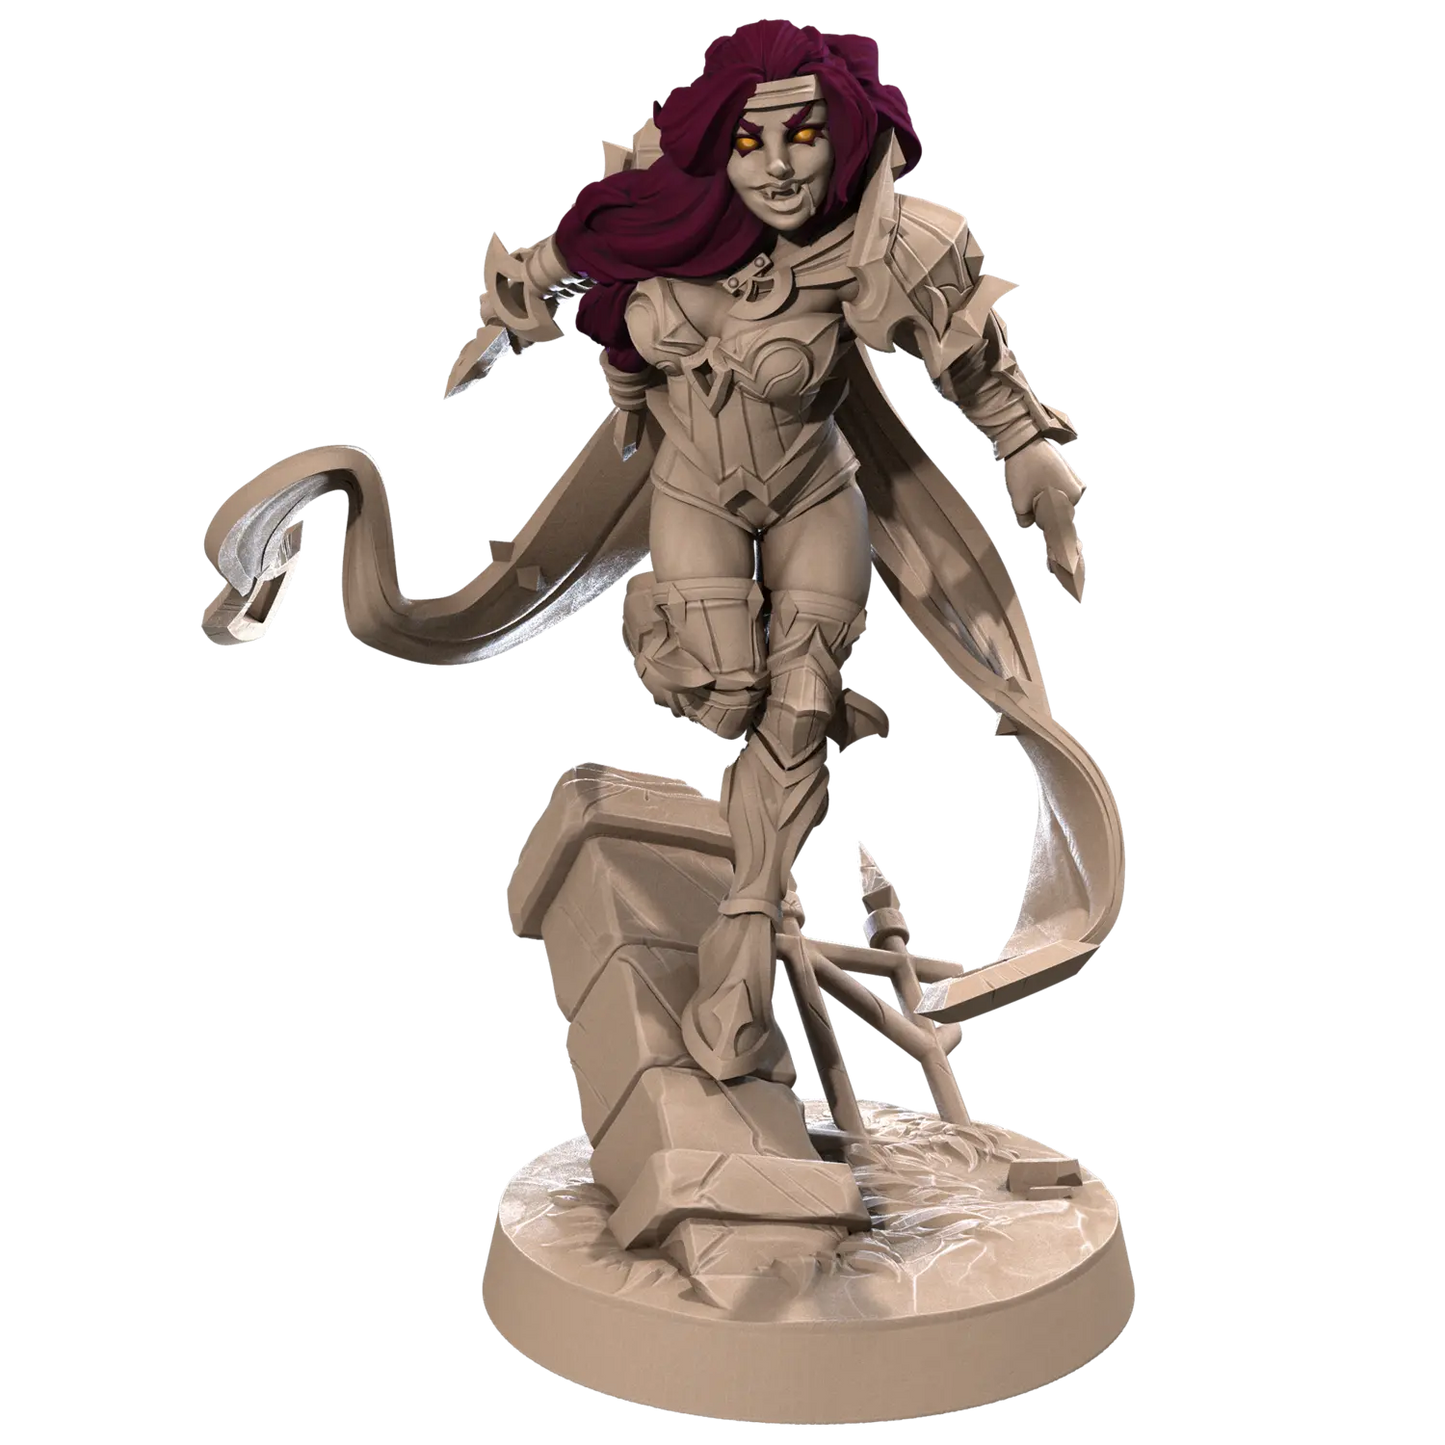 DnD Elf - Human - Miniature - Monsters - Rogue - Vampires Vivienne Darkwood 03 Elf - Human - Miniature - Monsters - Rogue - Vampires sold by DoubleHitShop